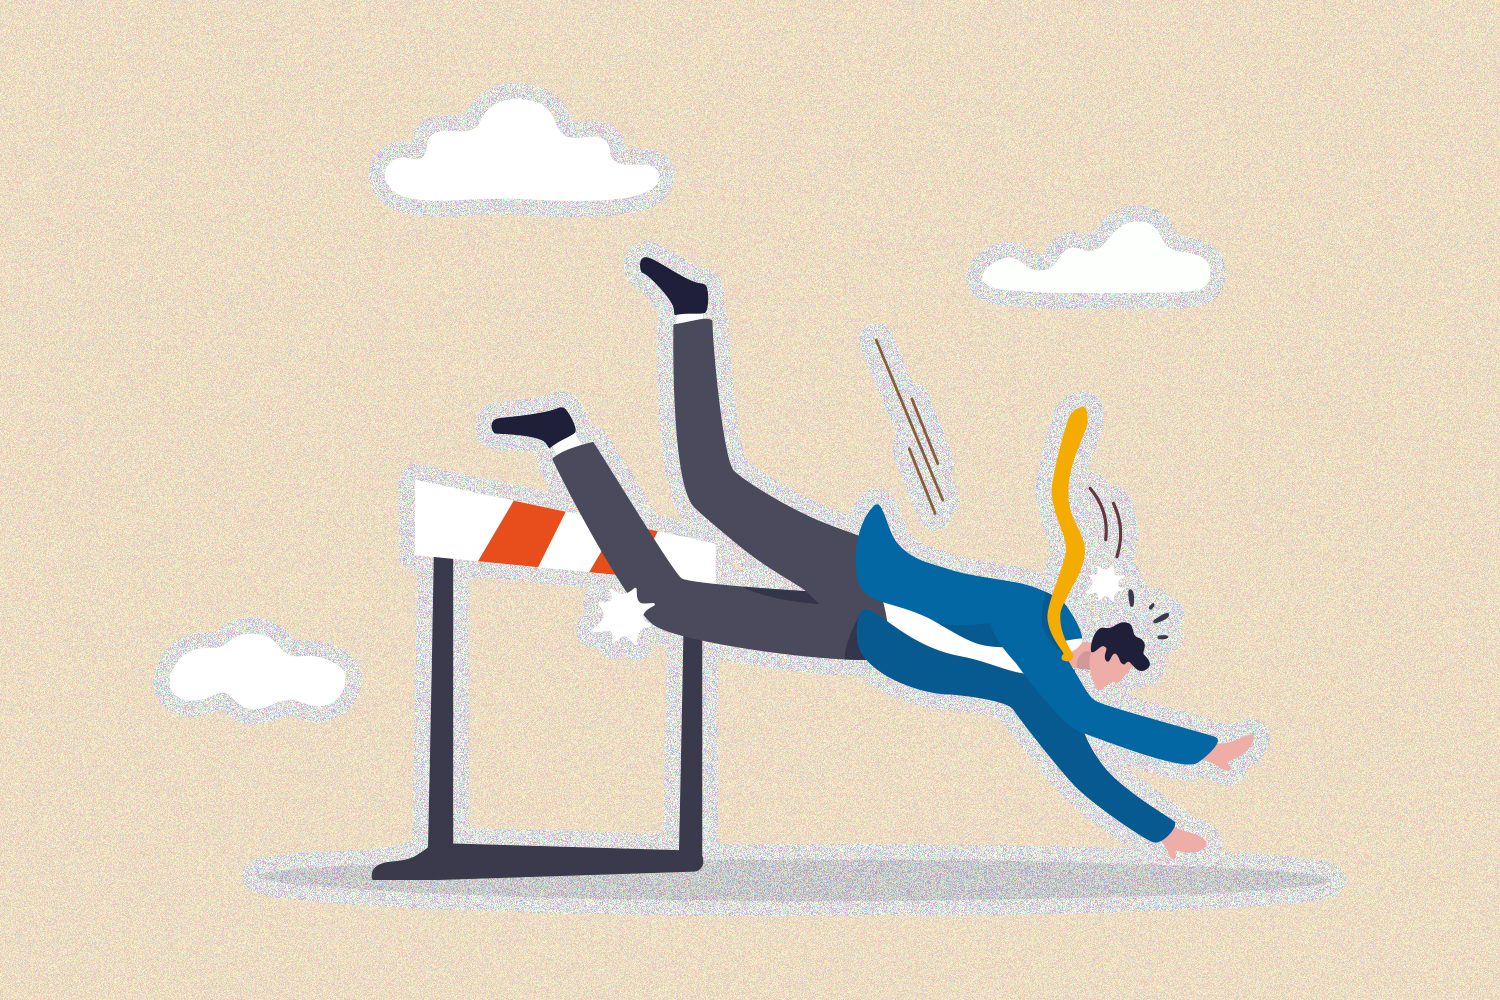 Cartoon business man tripping over a hurdle